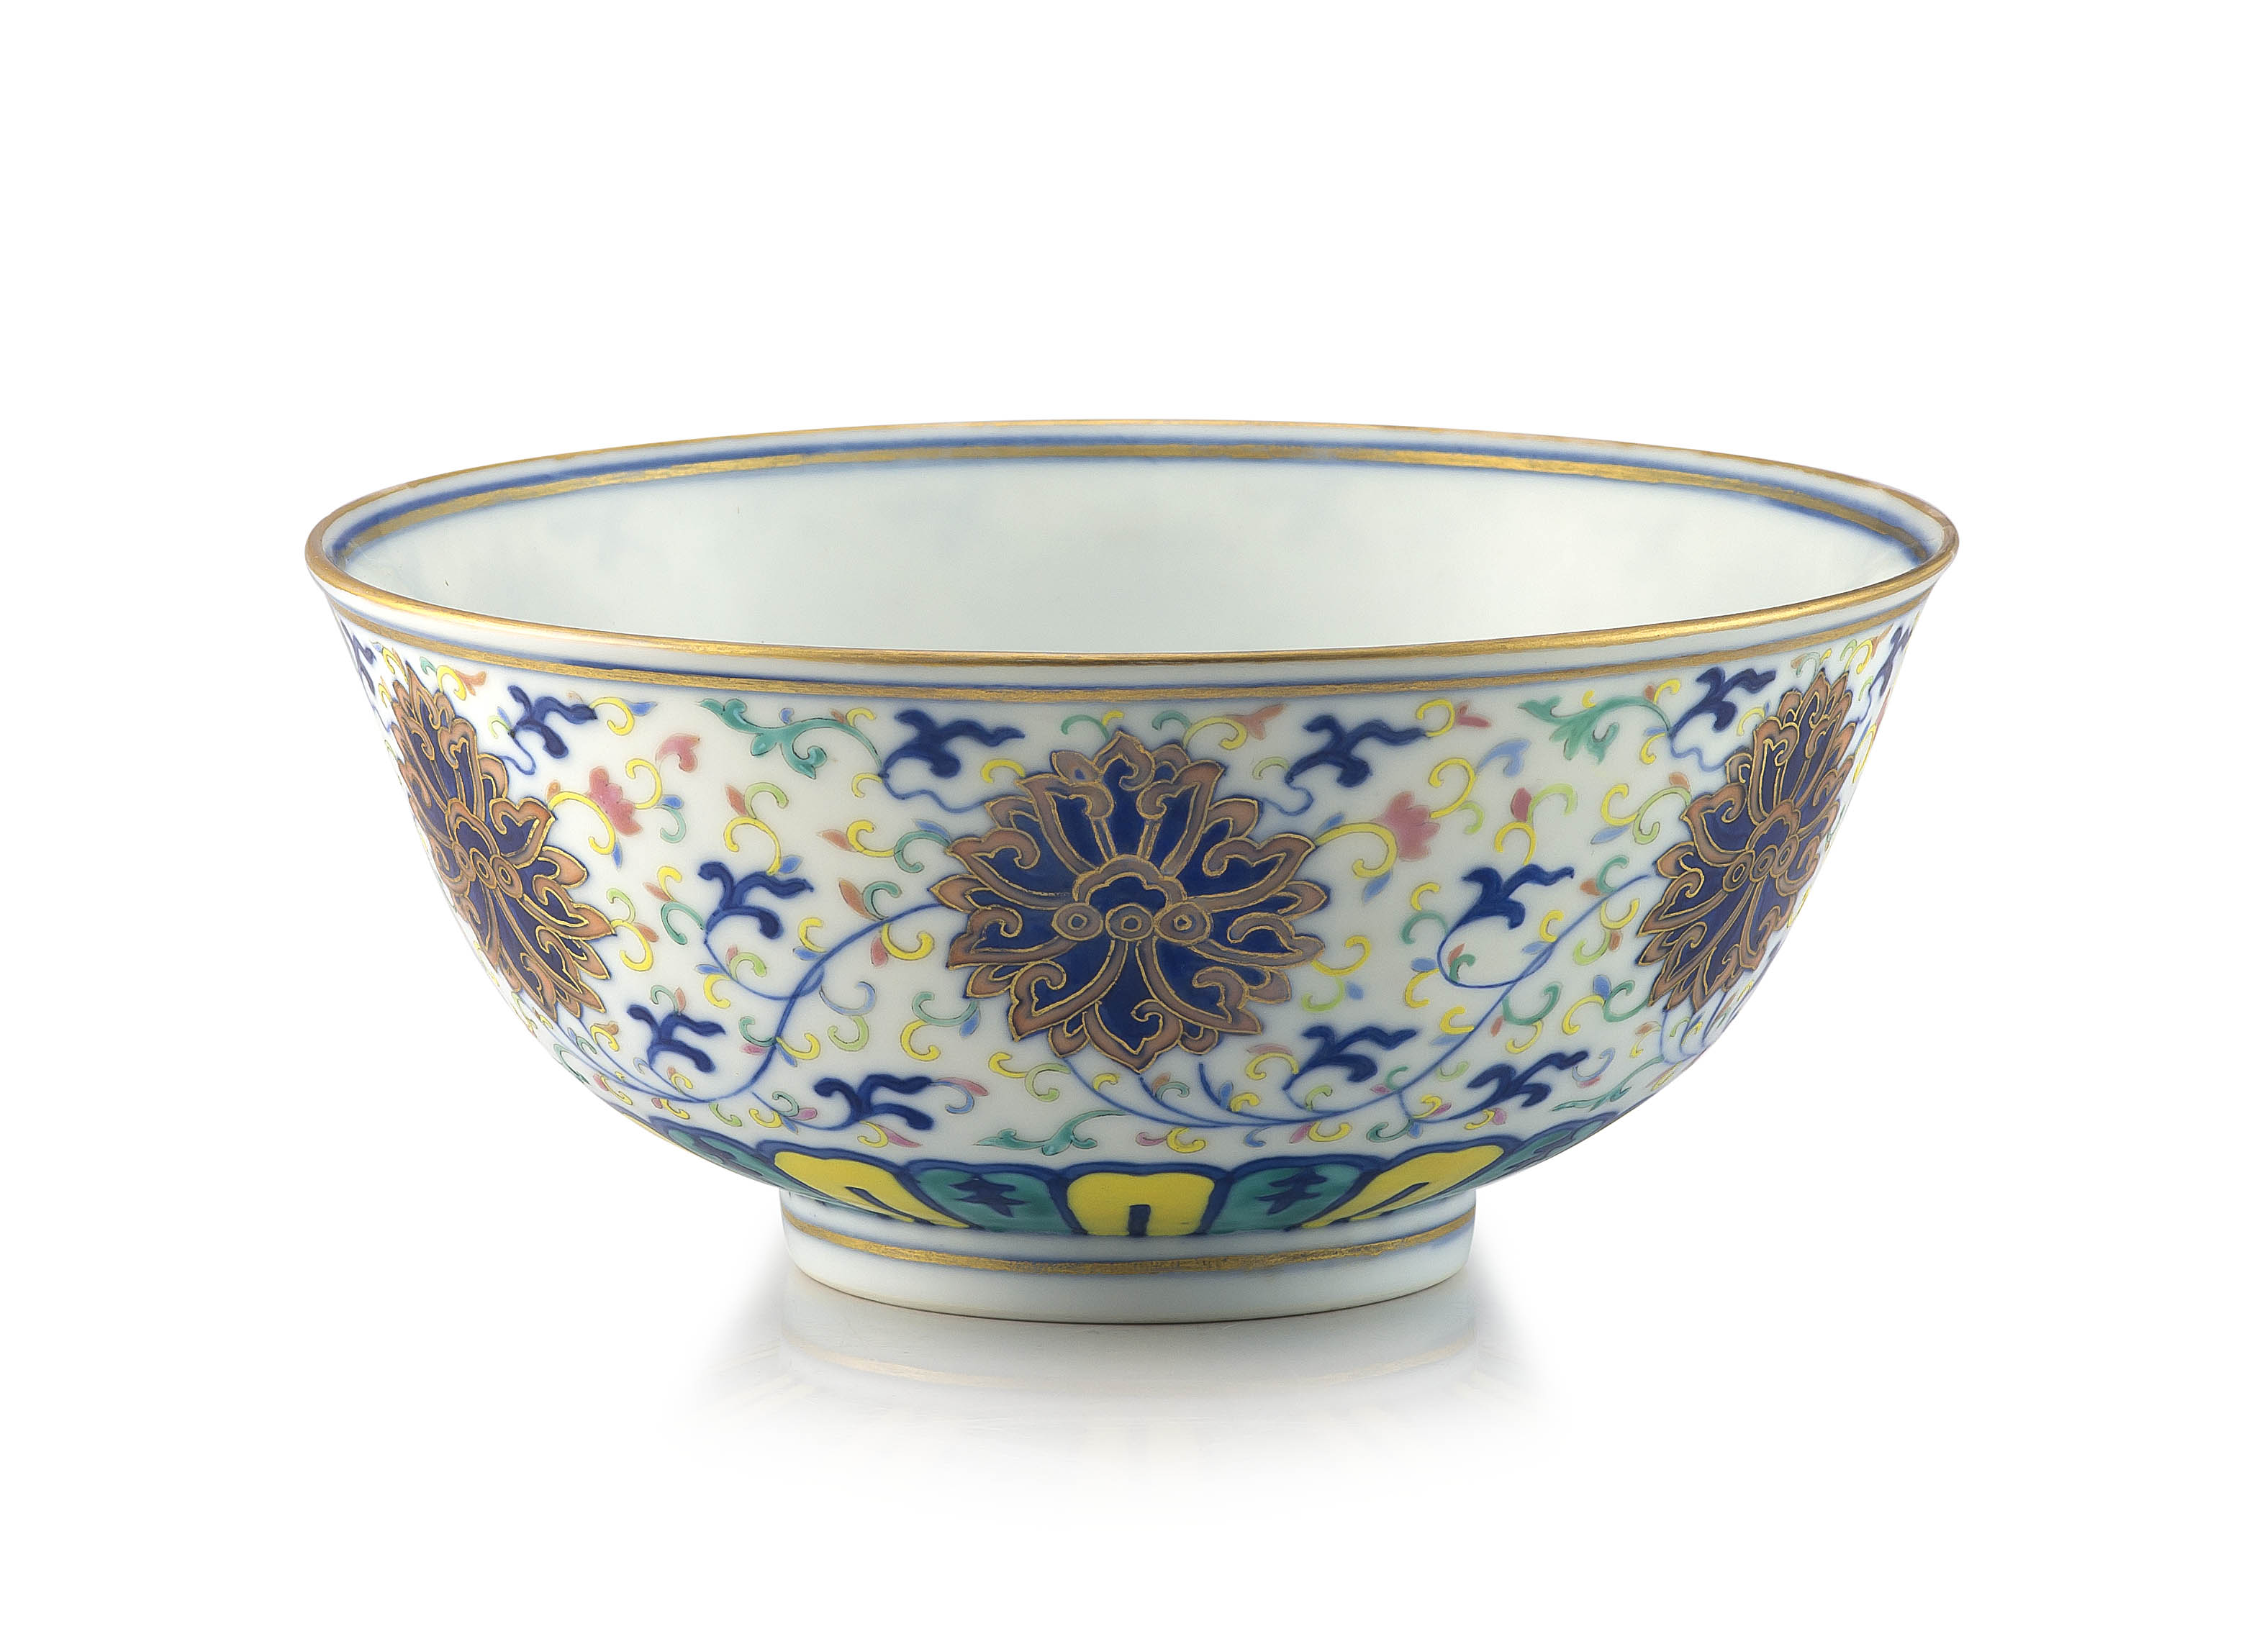 A Chinese polychrome enamel 'lotus scroll' bowl, Guangxu mark and period, 1875-1908